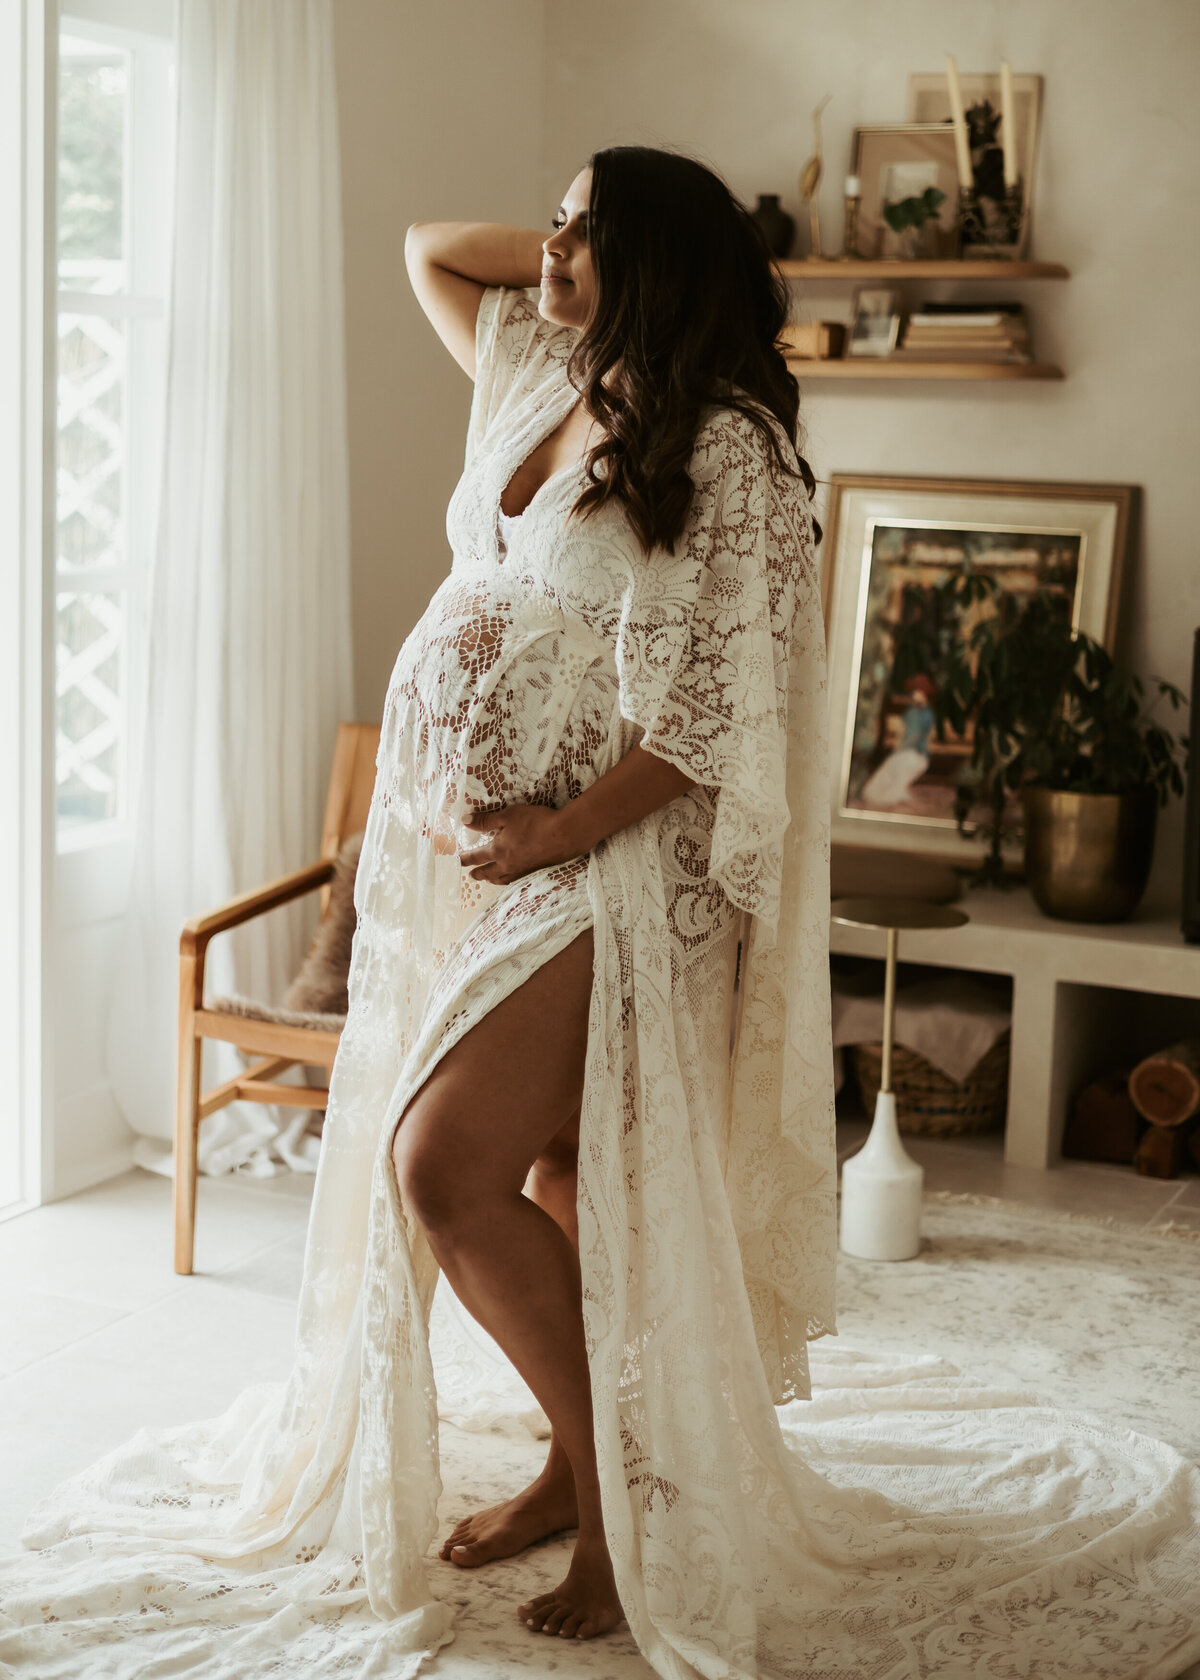 Pregnant mother to be posing for her in-home maternity session in a long white lace dress with slit up the side and holding pregnant belly